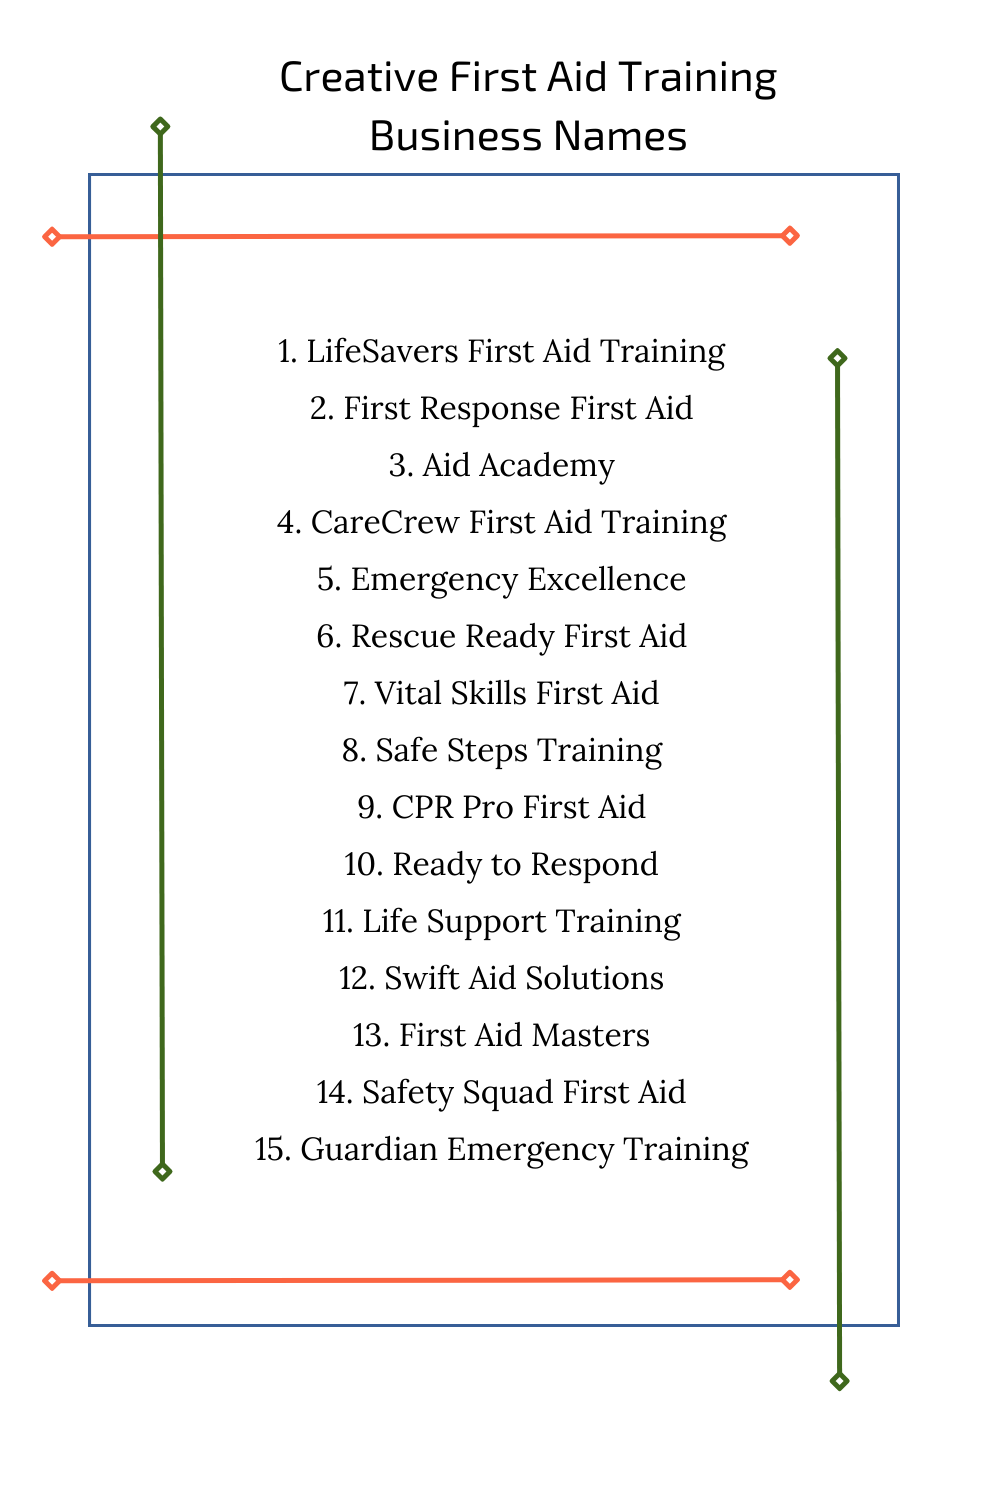 Creative First Aid Training Business Names